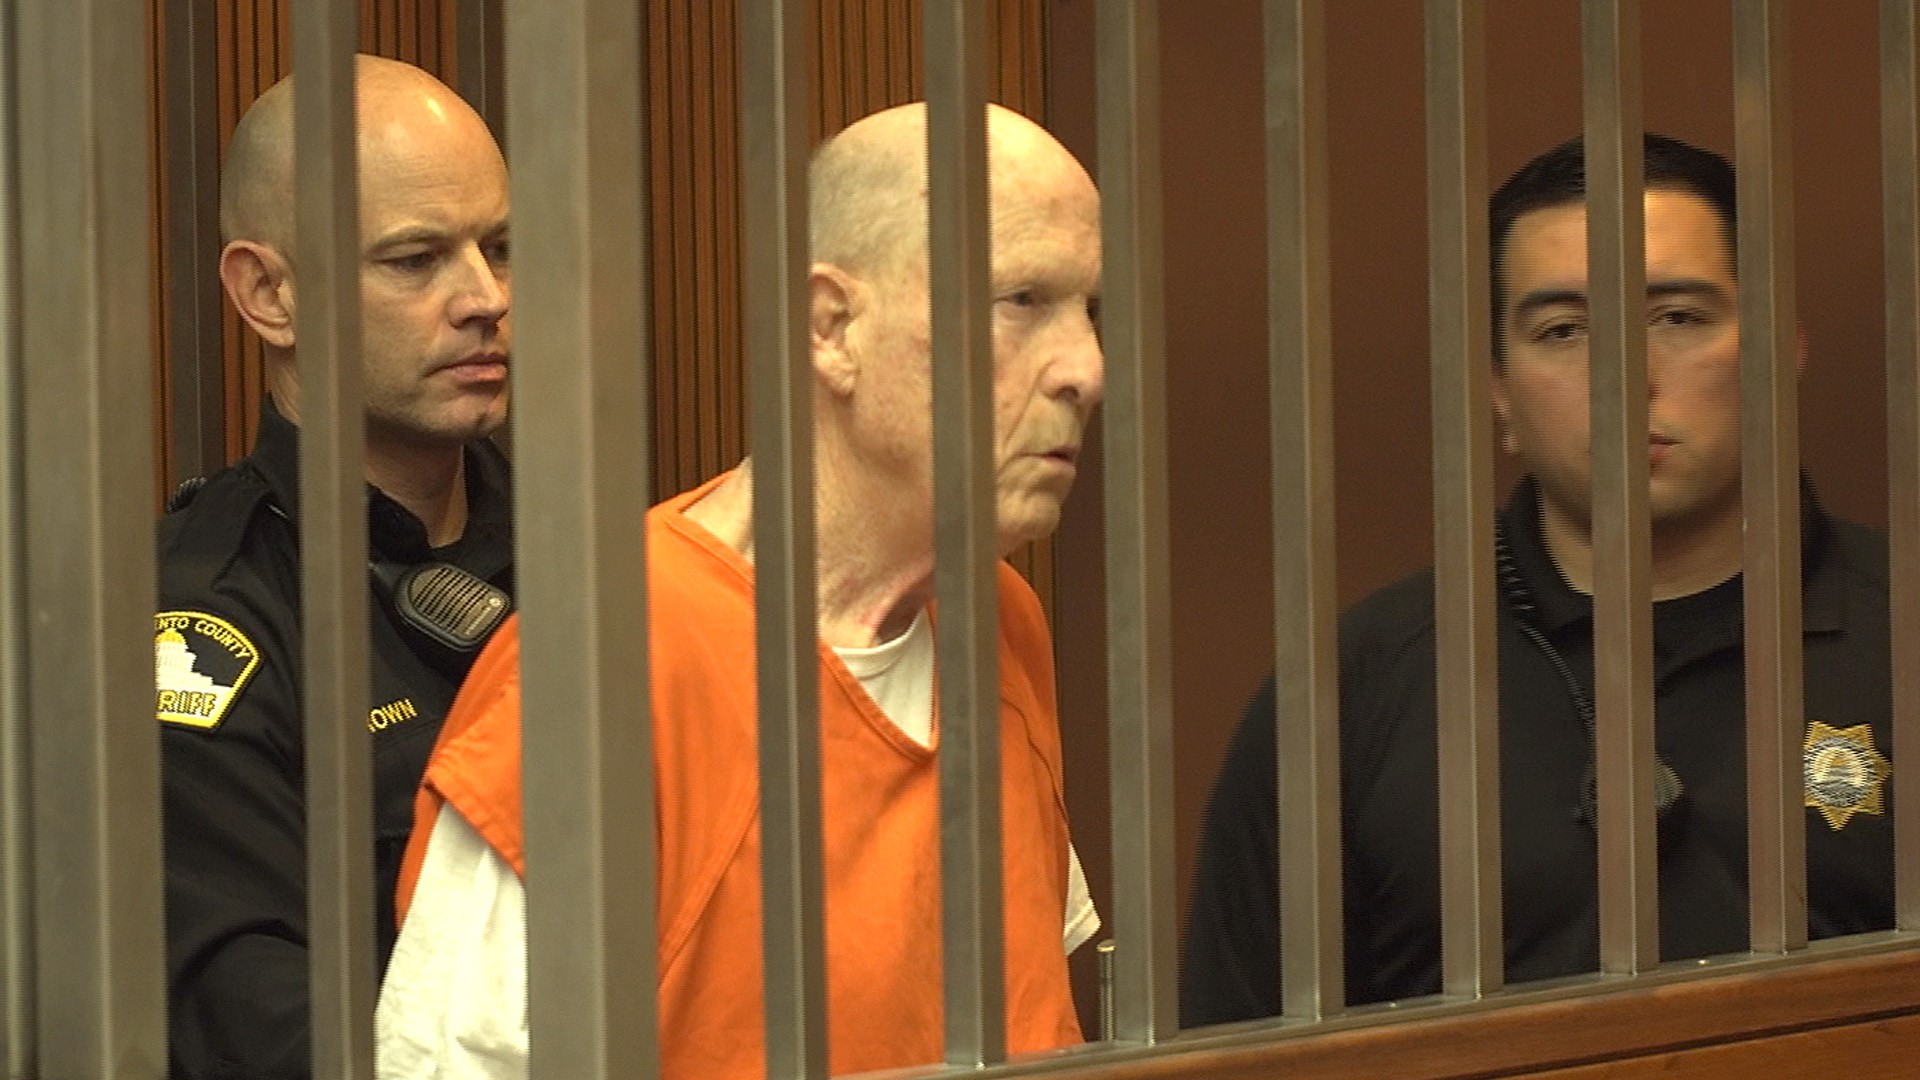 Attorneys say it would take more than 2 1/2 years just to read all of the reports that have come in on the Golden State Killer case.